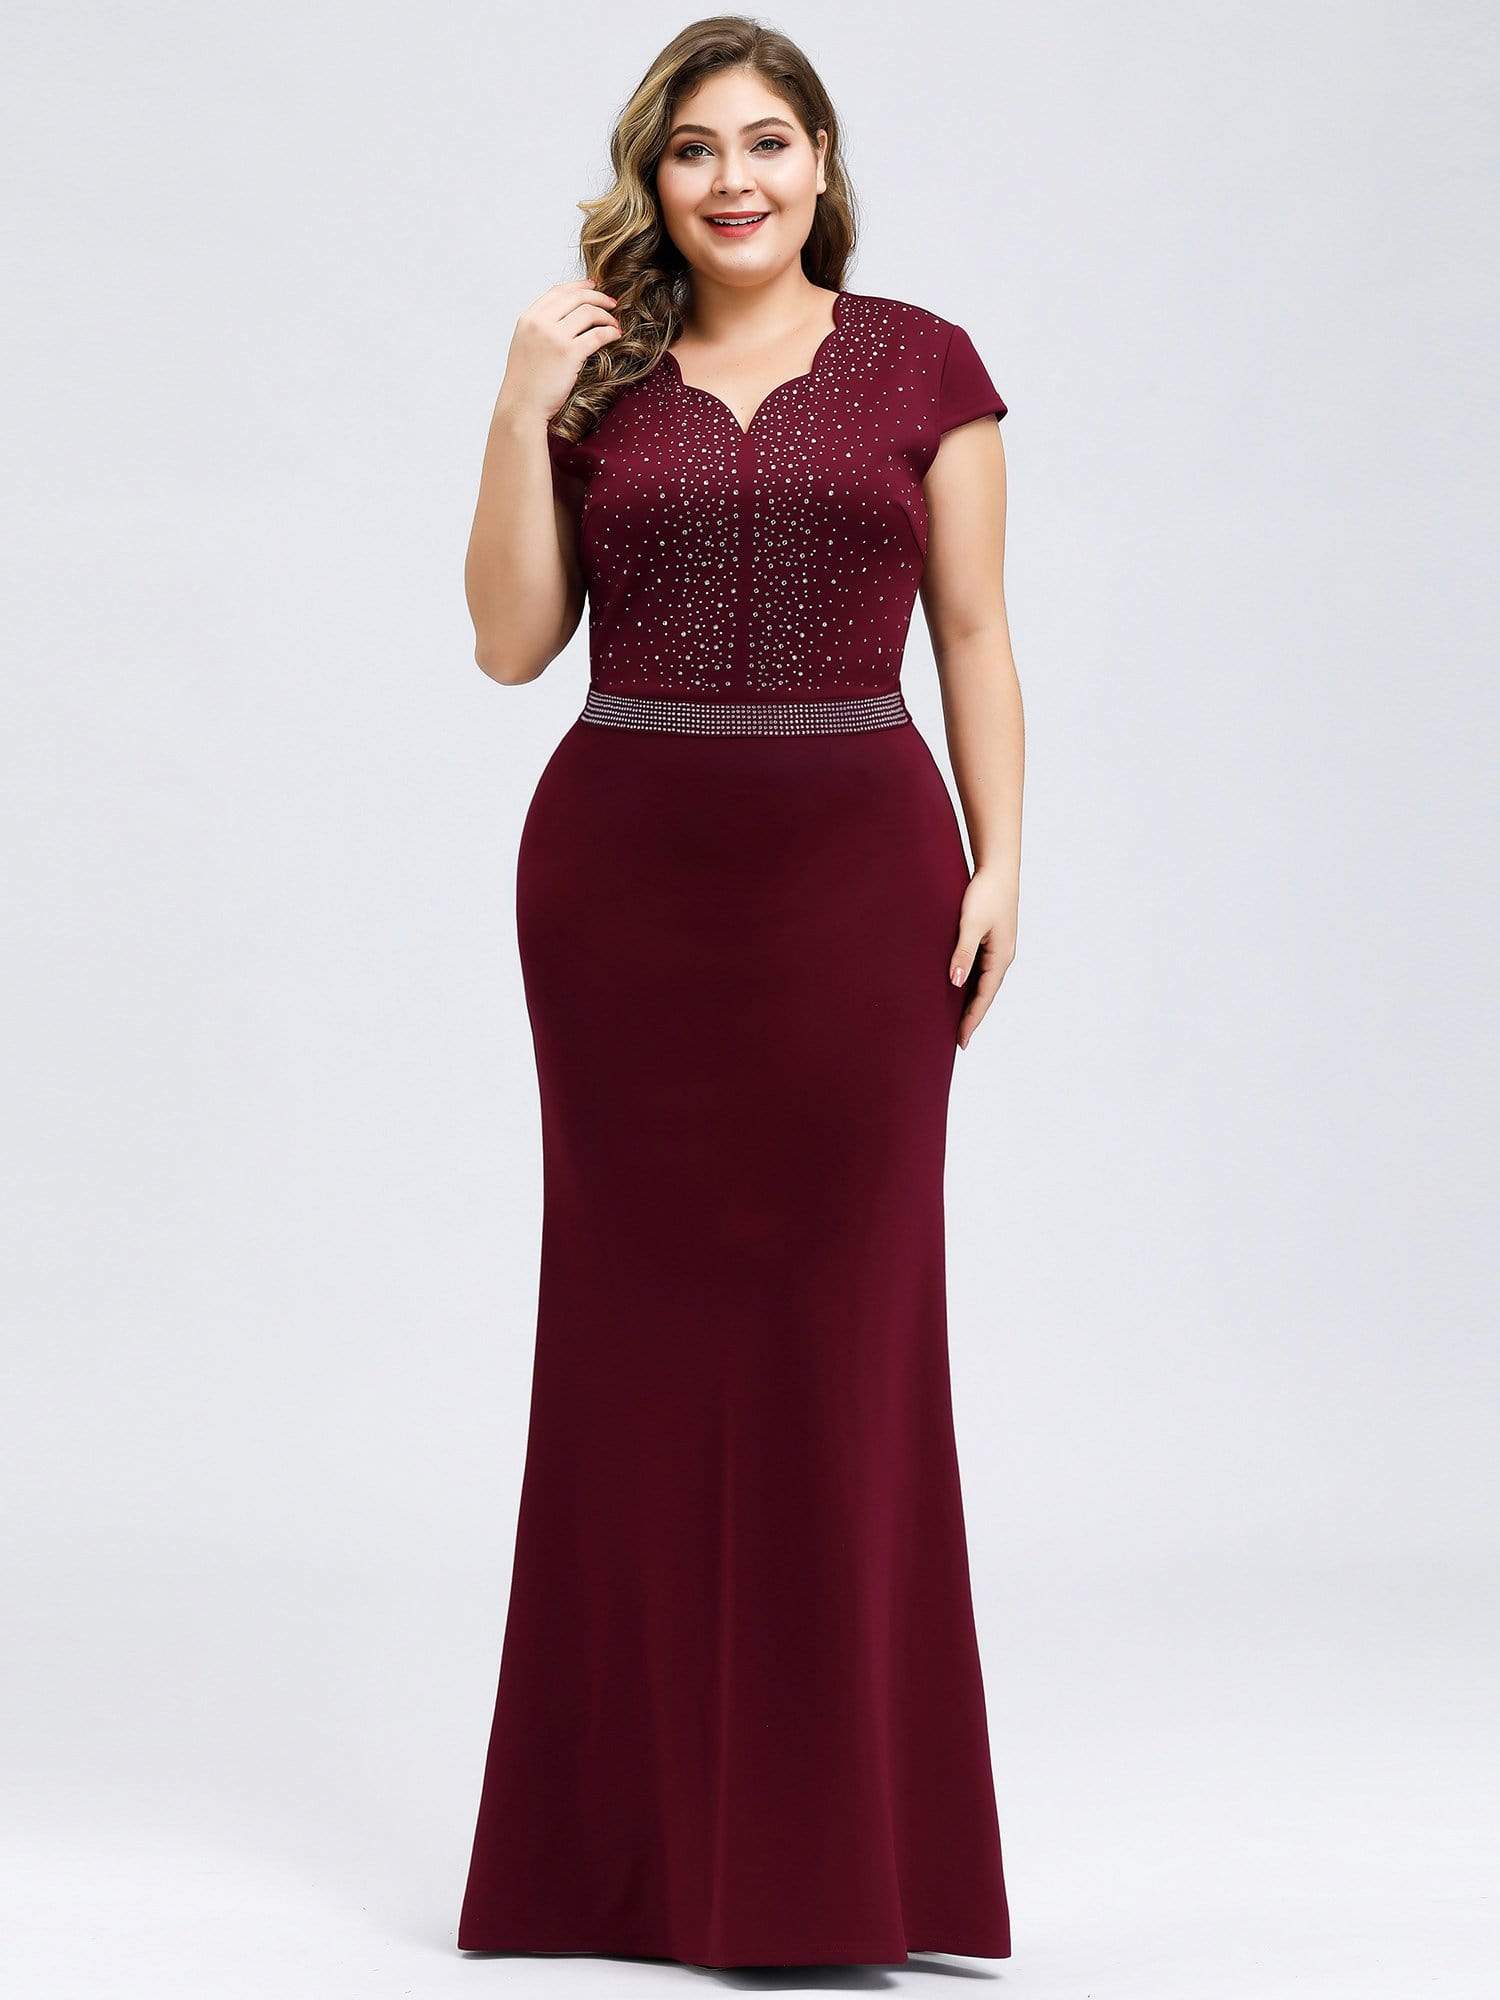 Plus Size Mother of Bridesmaid Dress with Shimmery Rhinestone